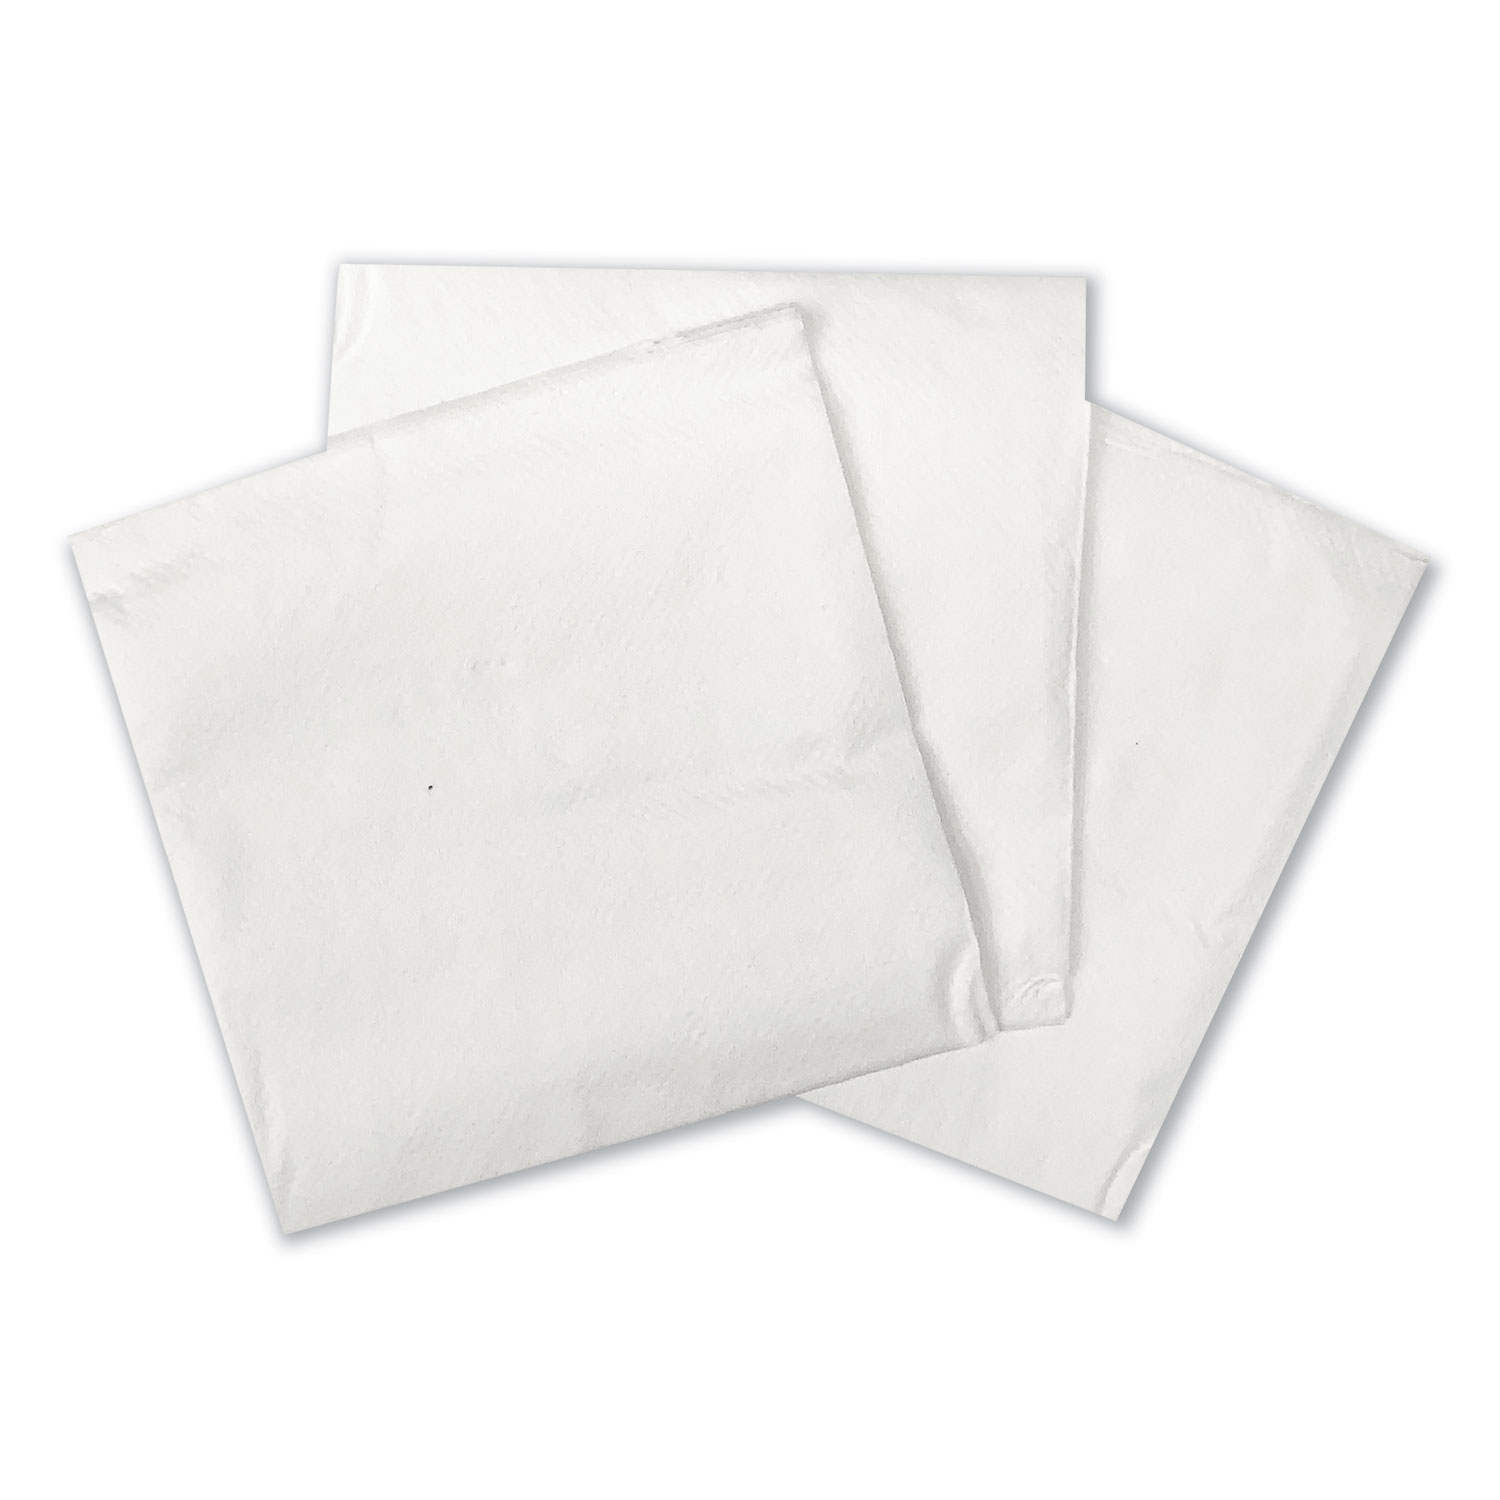 Cocktail Napkins, 1-Ply, 9w x 9d, White, 500/Pack, 8 Packs/Carton